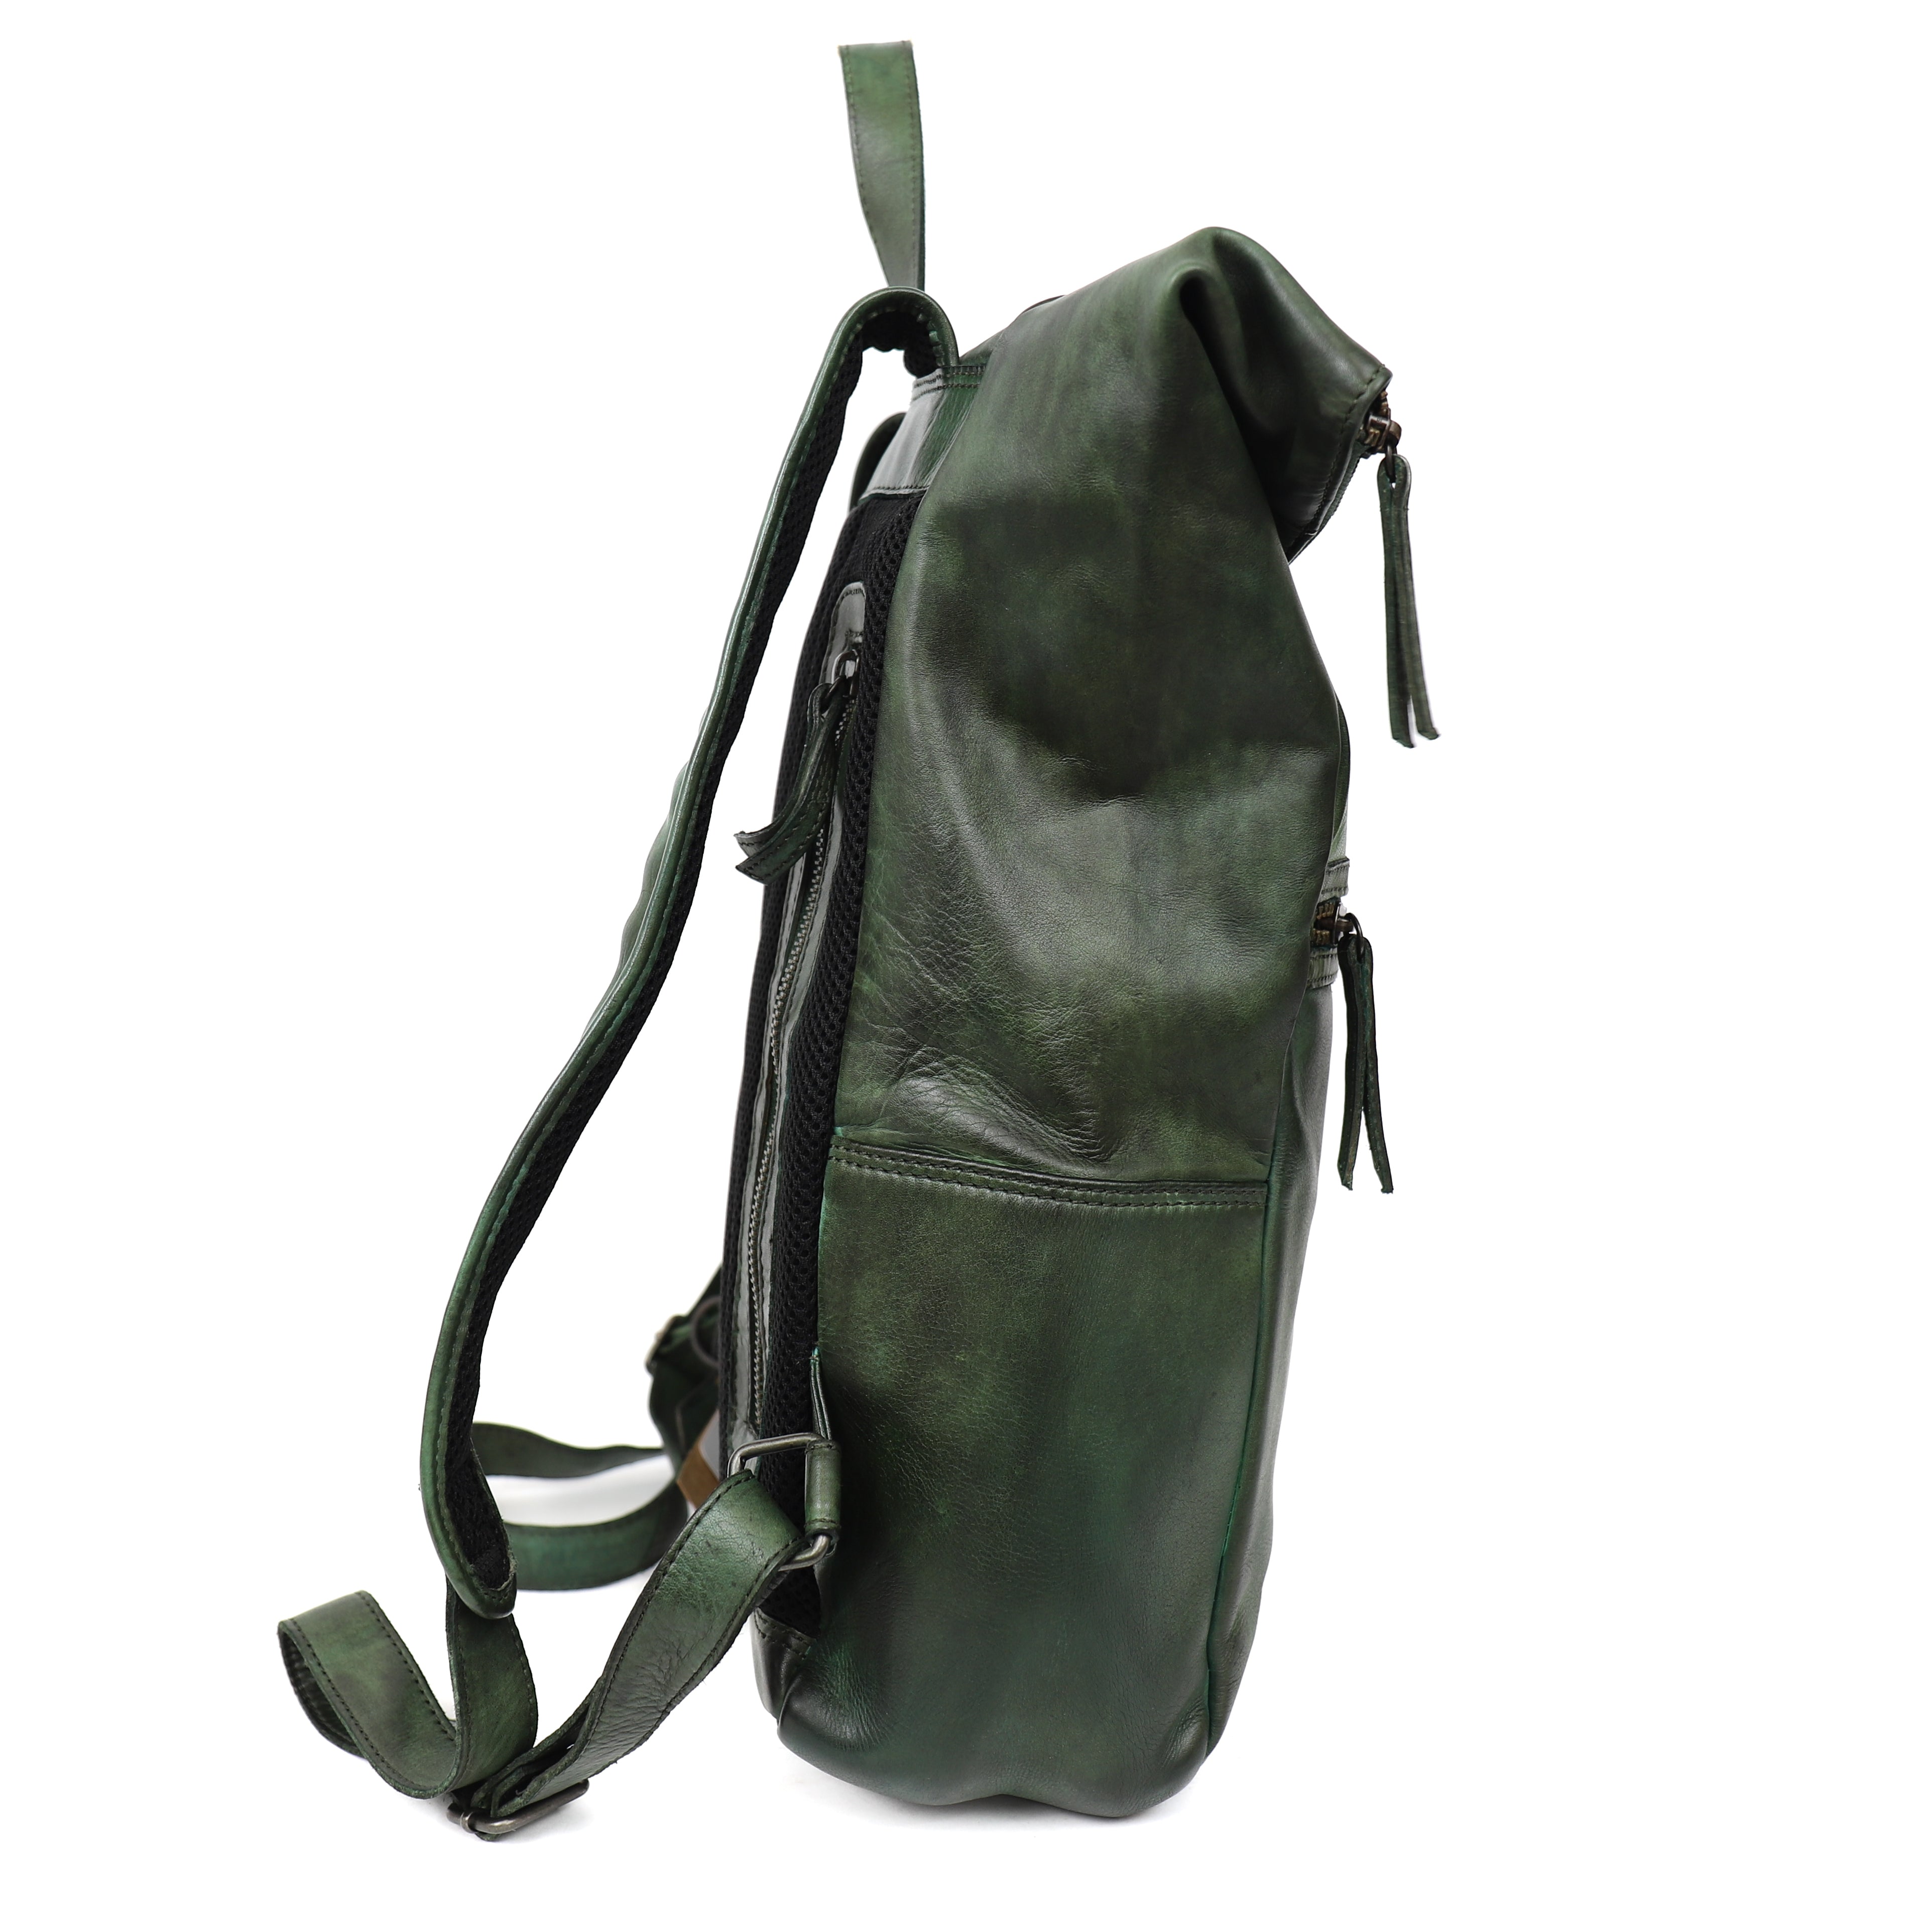 Backpack 'Rick' green - CL 40007